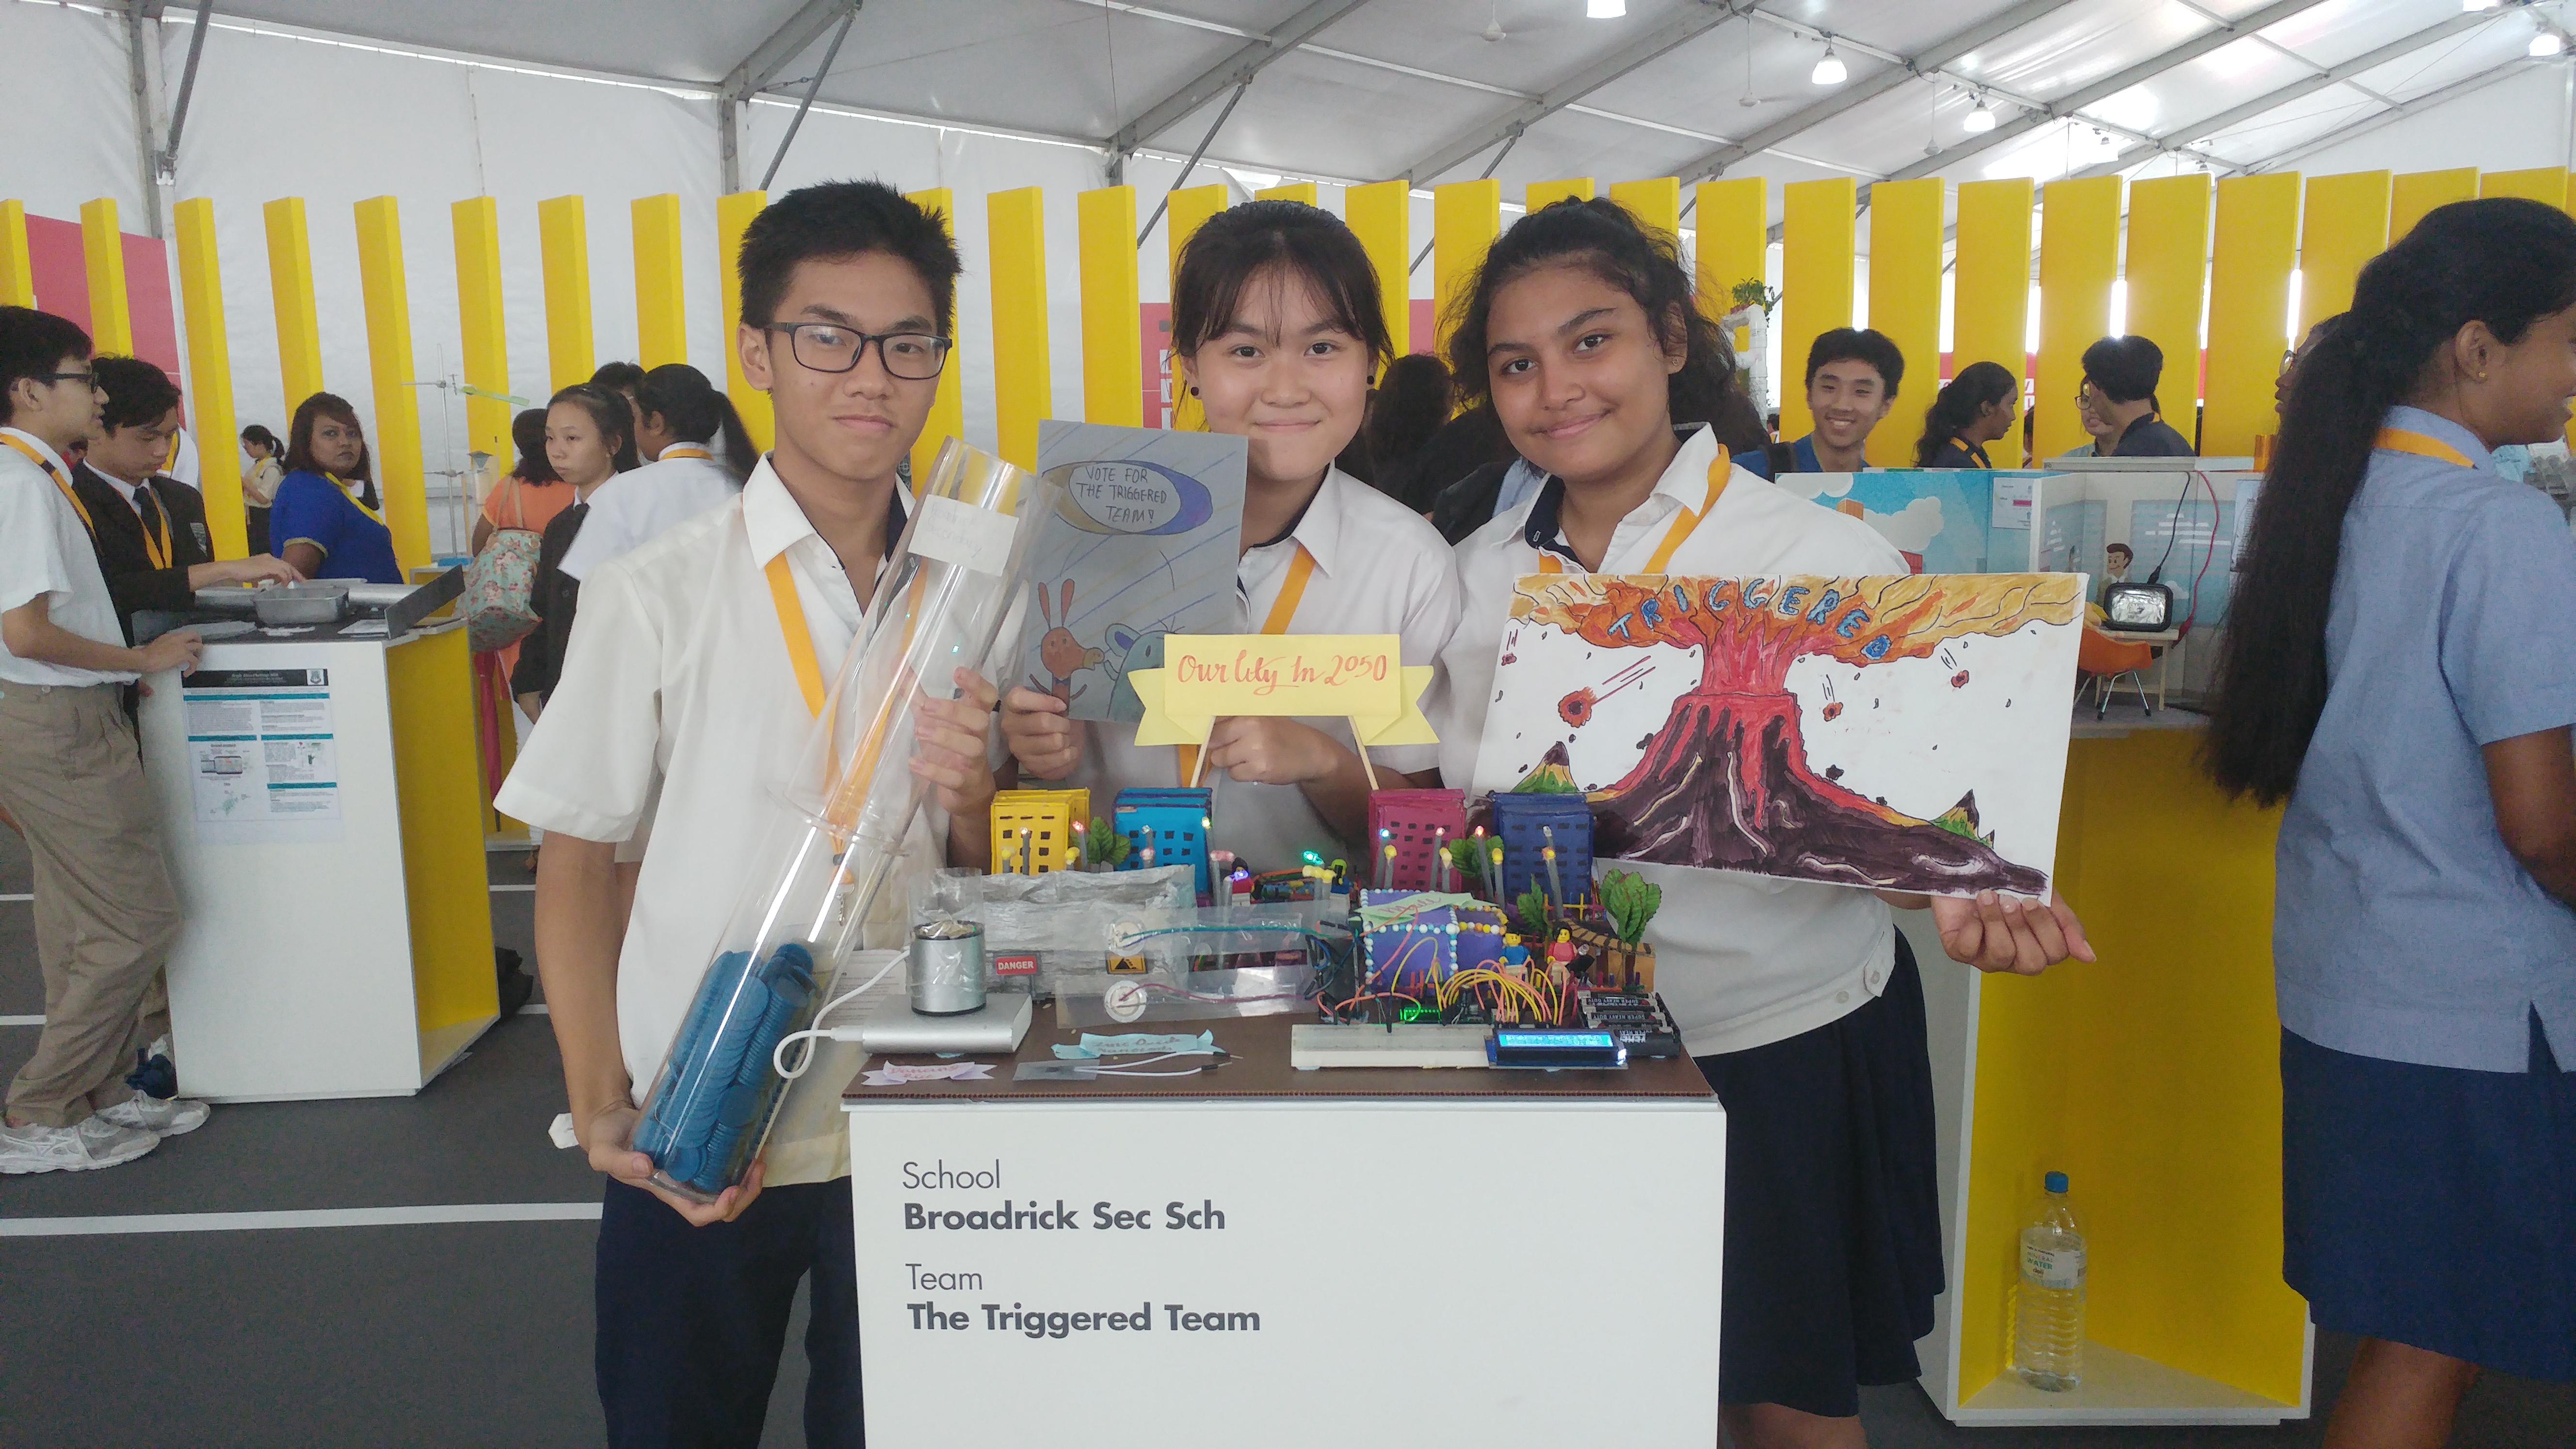 A proud moment for students of Broadrick Secondary School, Benjamin Wong Keat Meng, Chen Siyu and Aminah Hydar with their prototype and hard earned votes during the finals of the Bright Ideas Challenge 2018.

Photo  credit: Broadrick Secondary School
